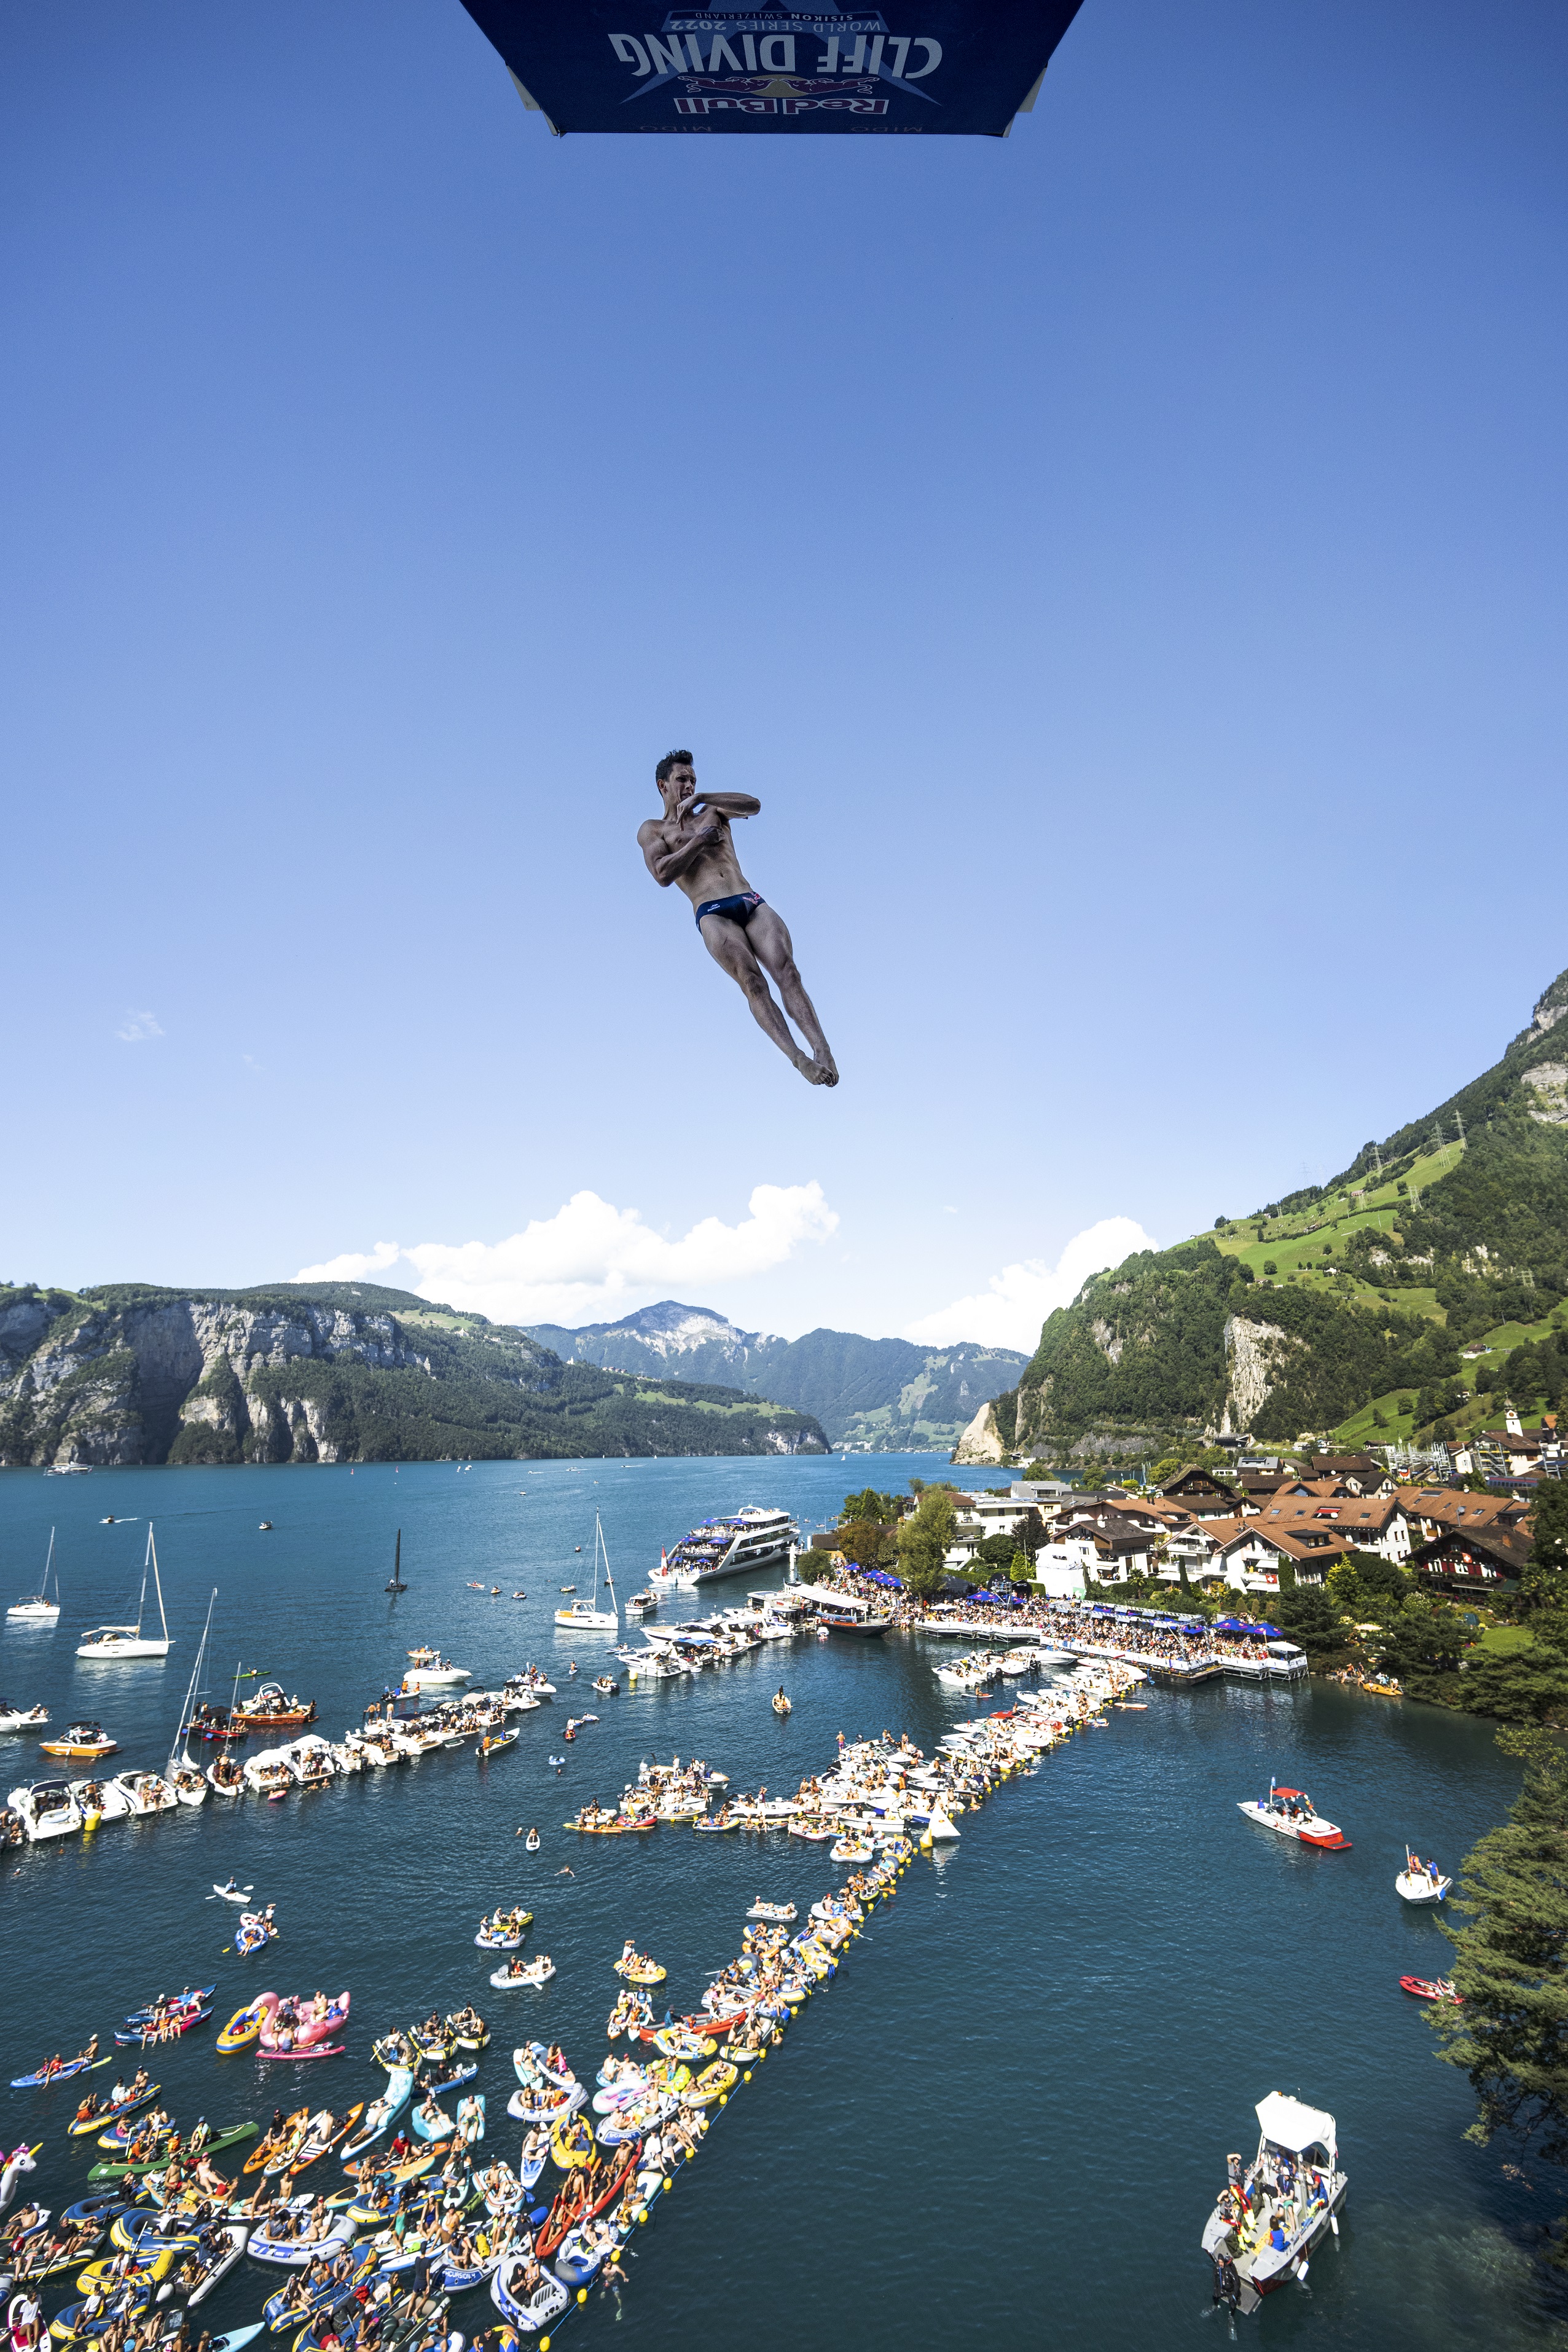 Aidan Heslop of the UK dives from the 27 metre platform during the final competition day of the sixth stop of the Red Bull Cliff Diving World Series in Sisikon, Switzerland on September 11, 2022. 